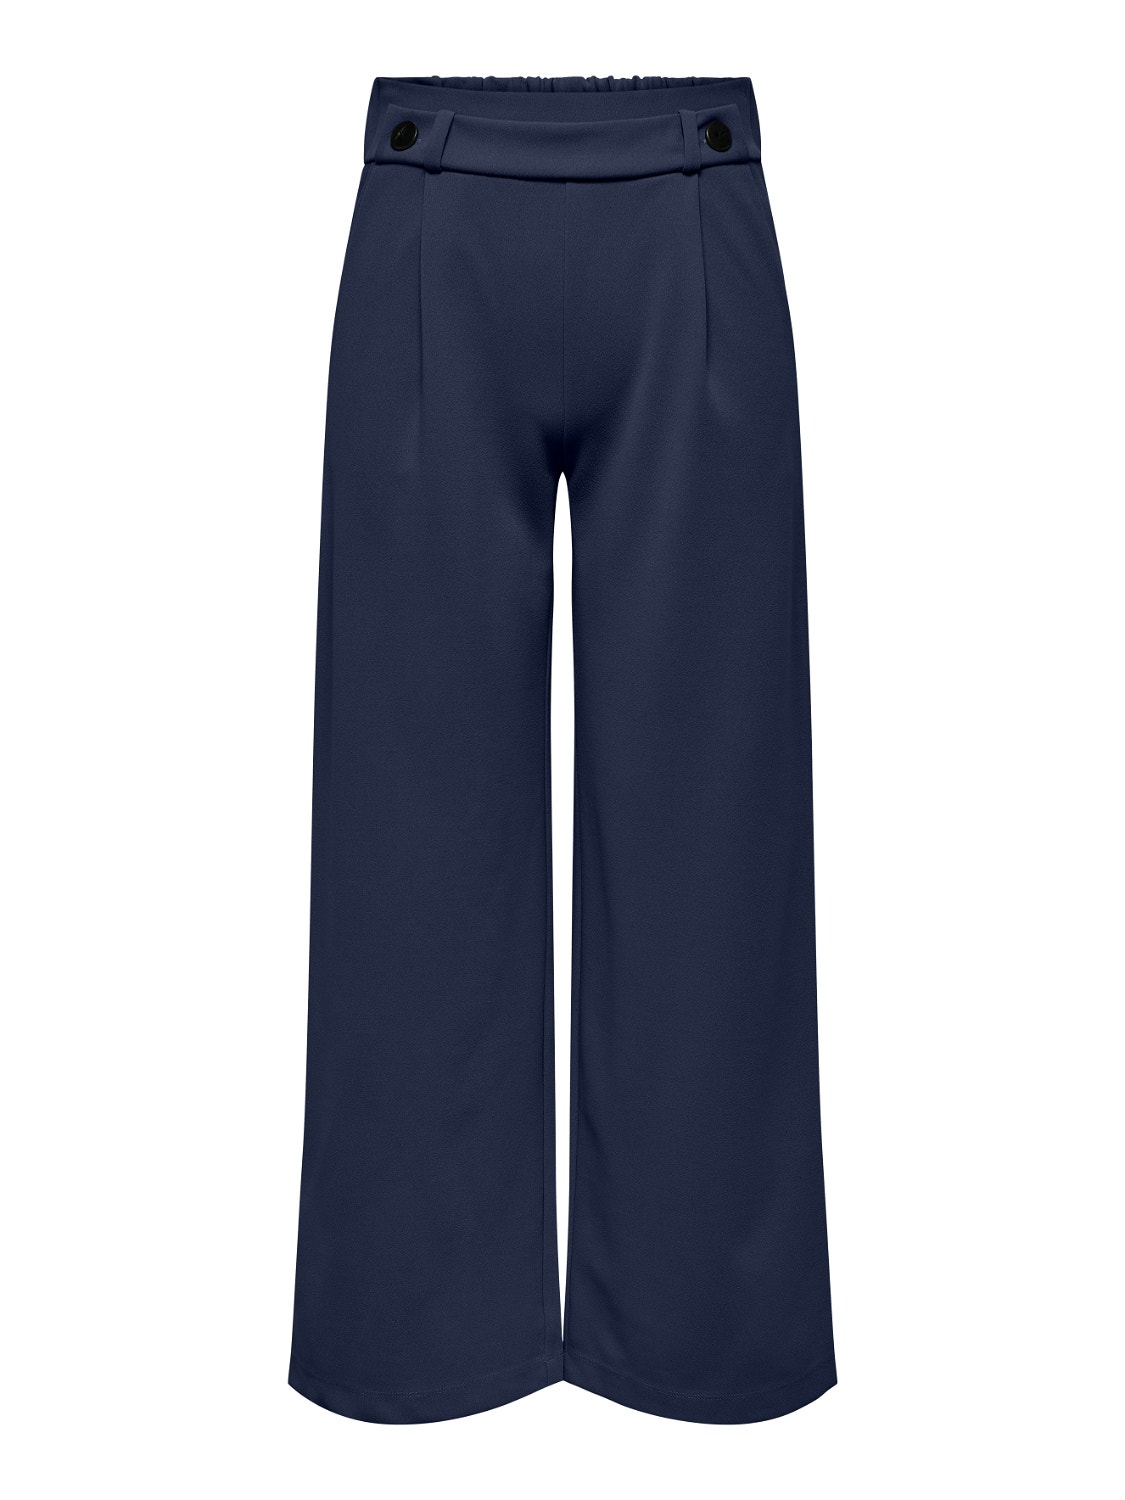 ONLY Wide Trousers -Black Iris - 15208430